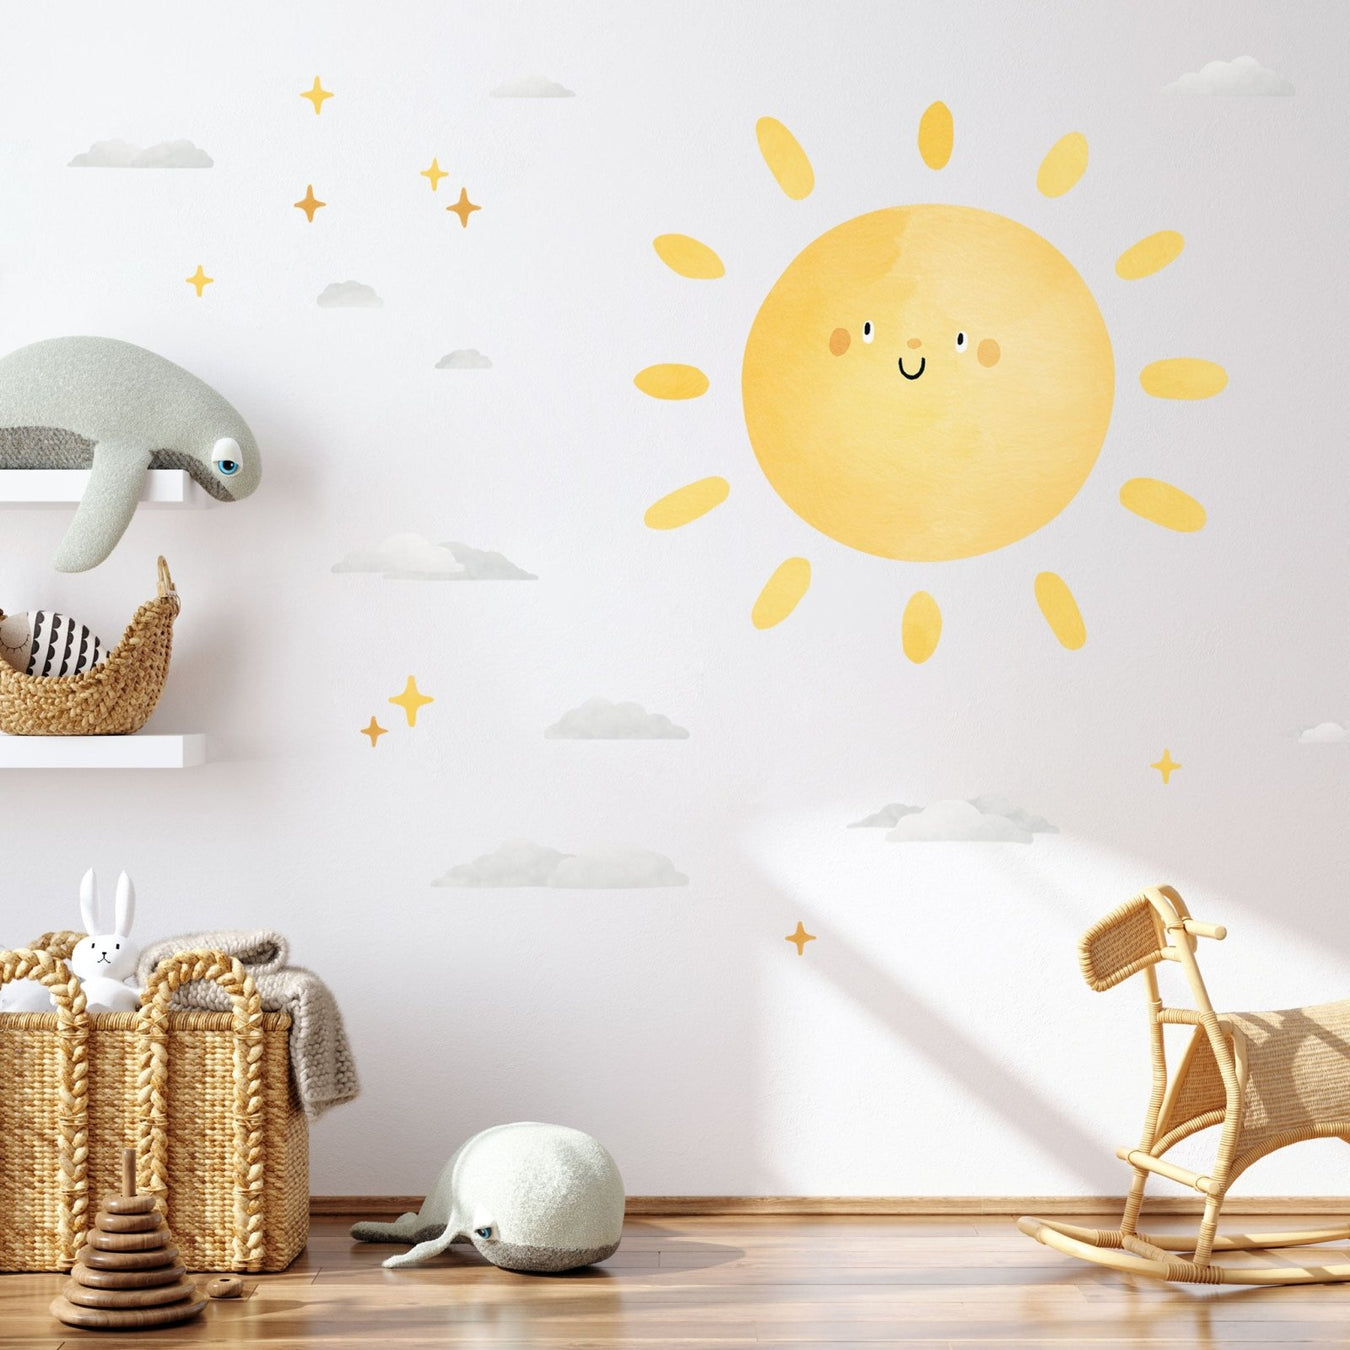 The Cutest Wall Stickers for Kids Rooms - Made of Sundays